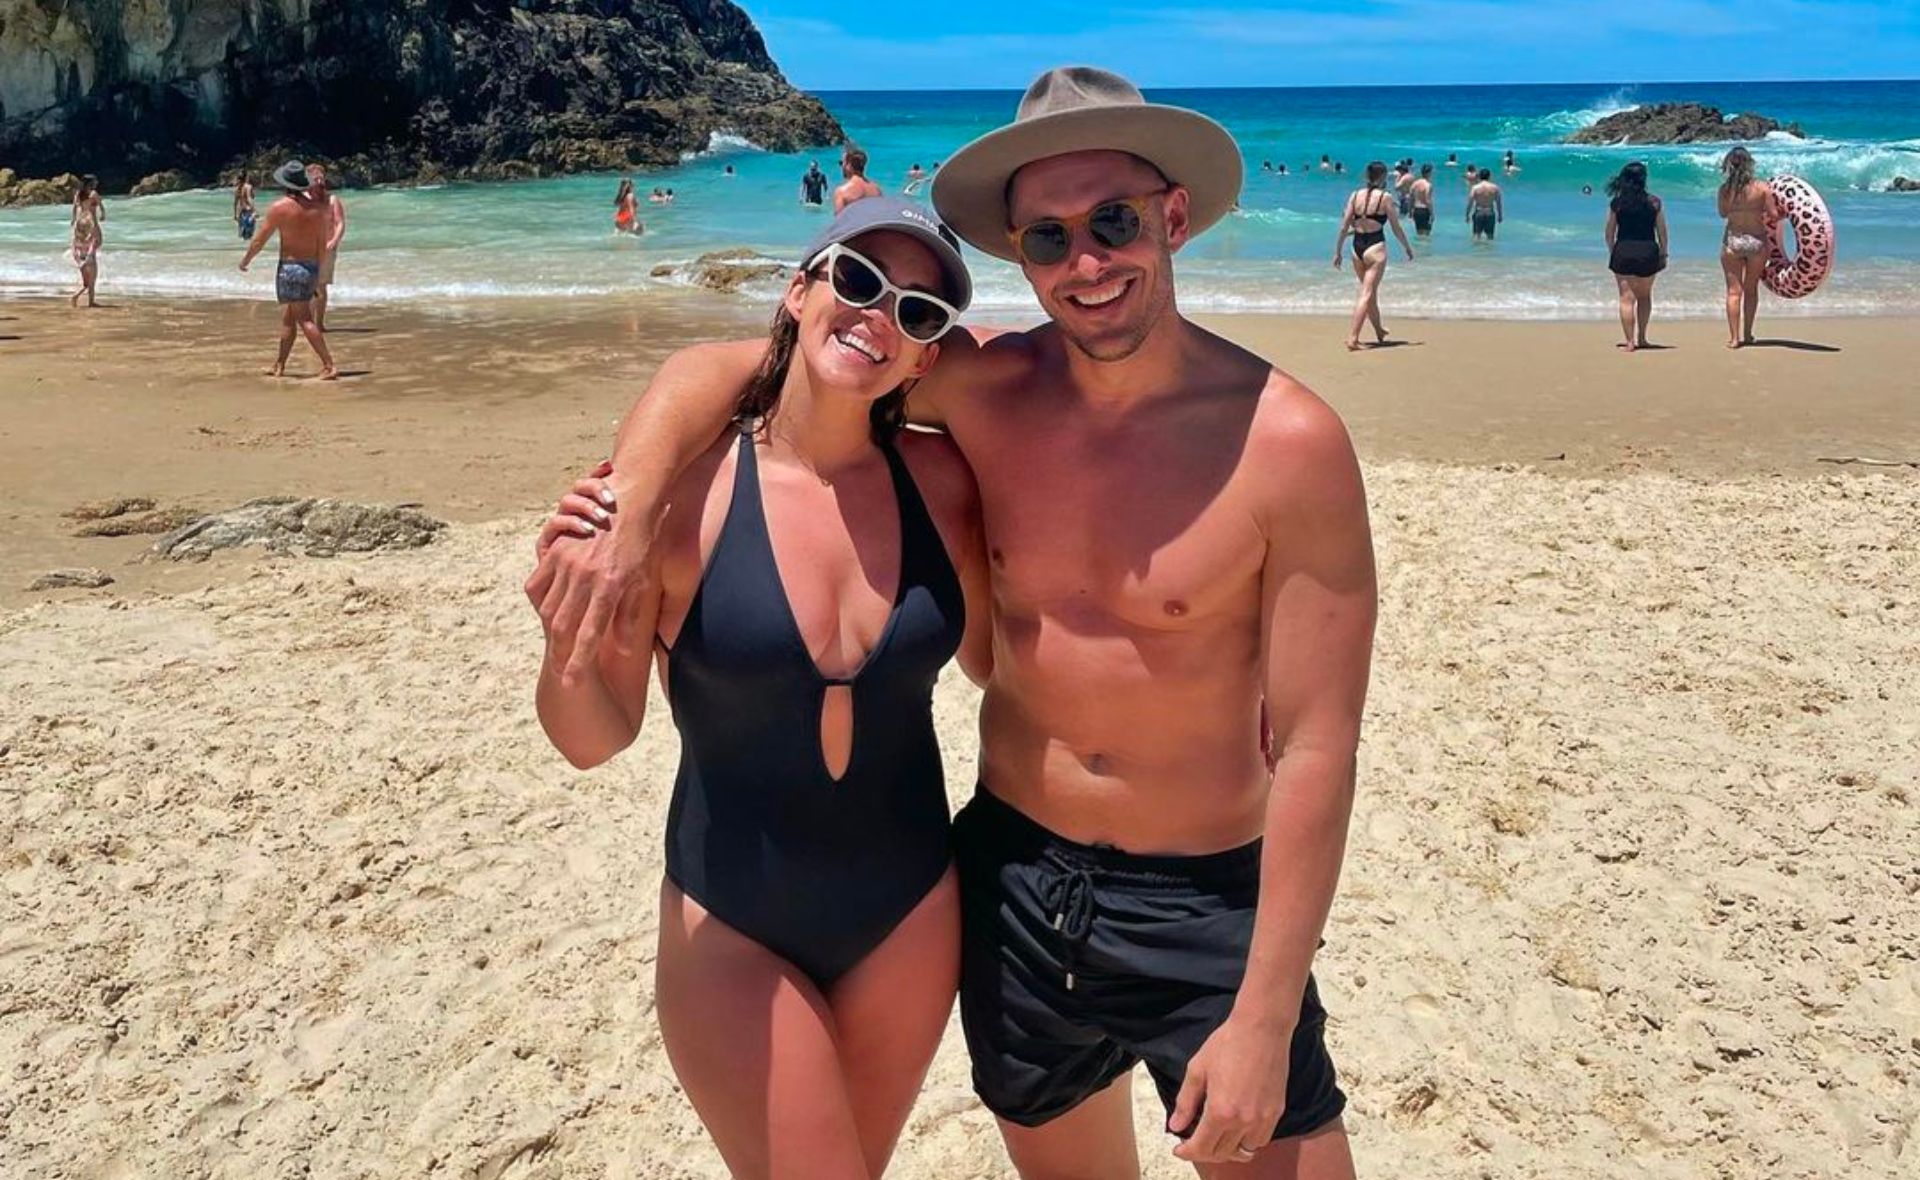 Georgia Love and Lee Elliott shock fans with ‘NSFW’ vacation photo